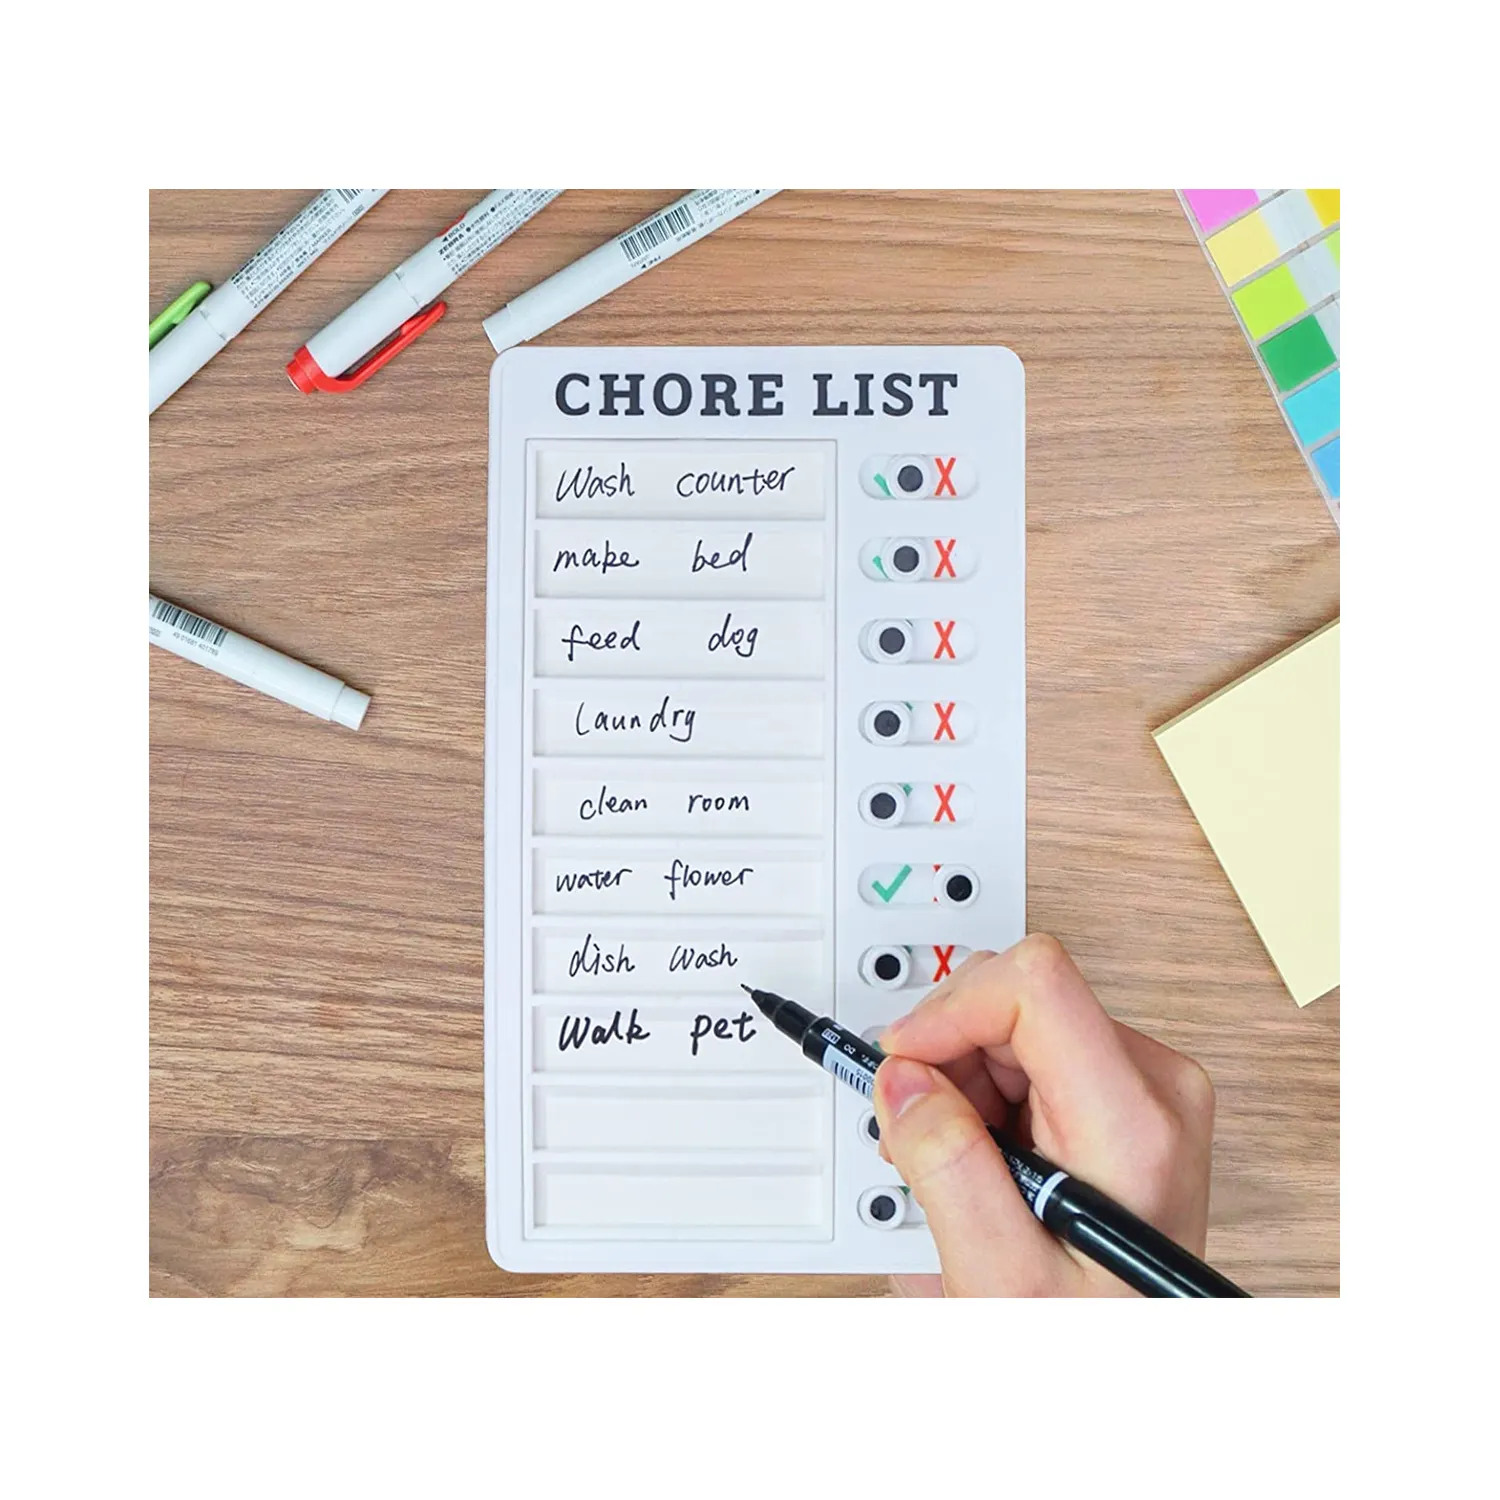 Chore List Checklist Board With Marker and adhesive-pad DIY Chore List Cleaning Schedule Memo Plastic Board Checklist